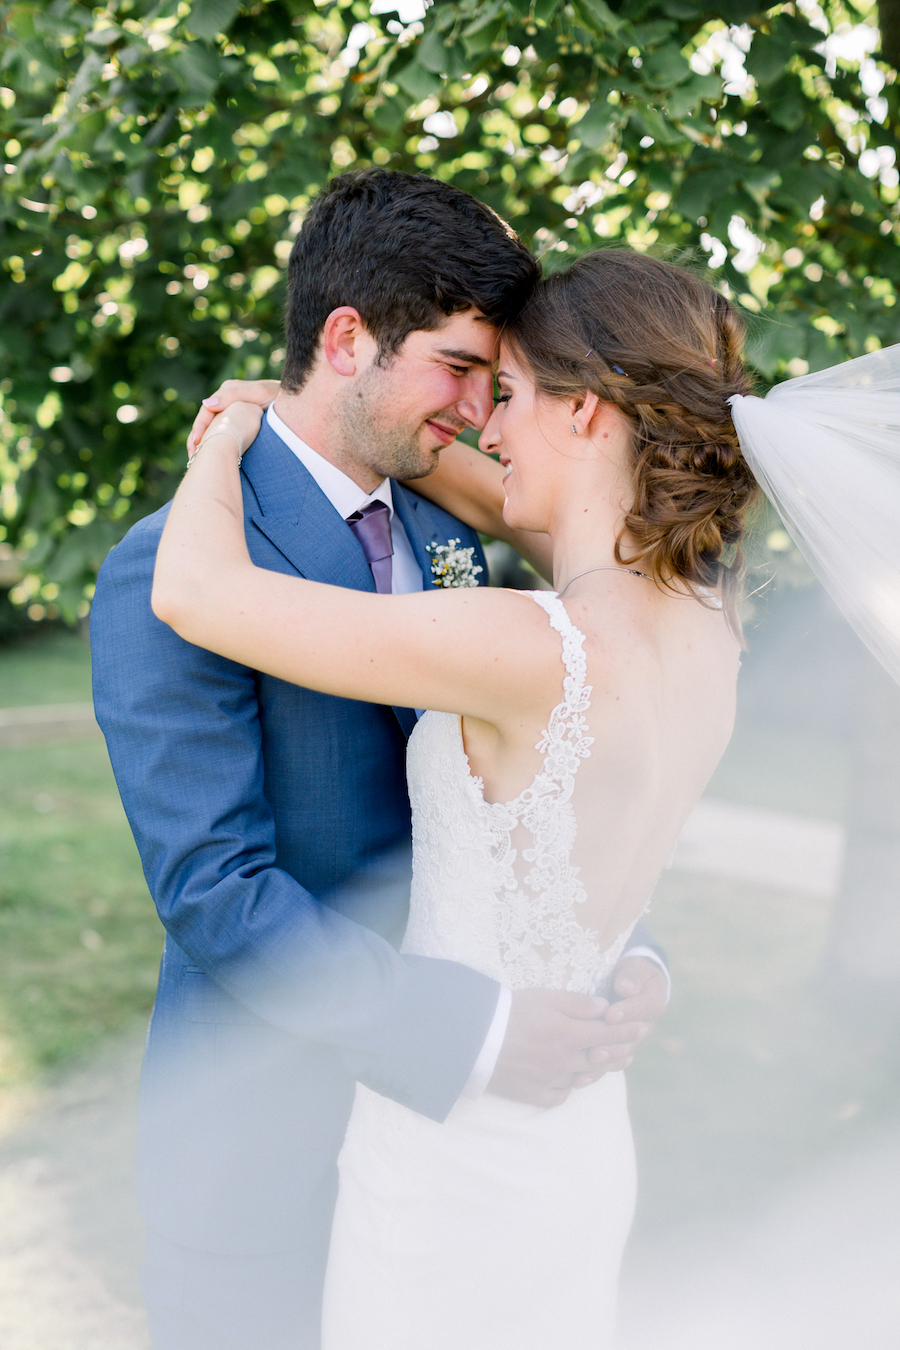 Louisa & Will's light and airy sunflower wedding at Lapstone Barn, with Hannah K Photography (35)